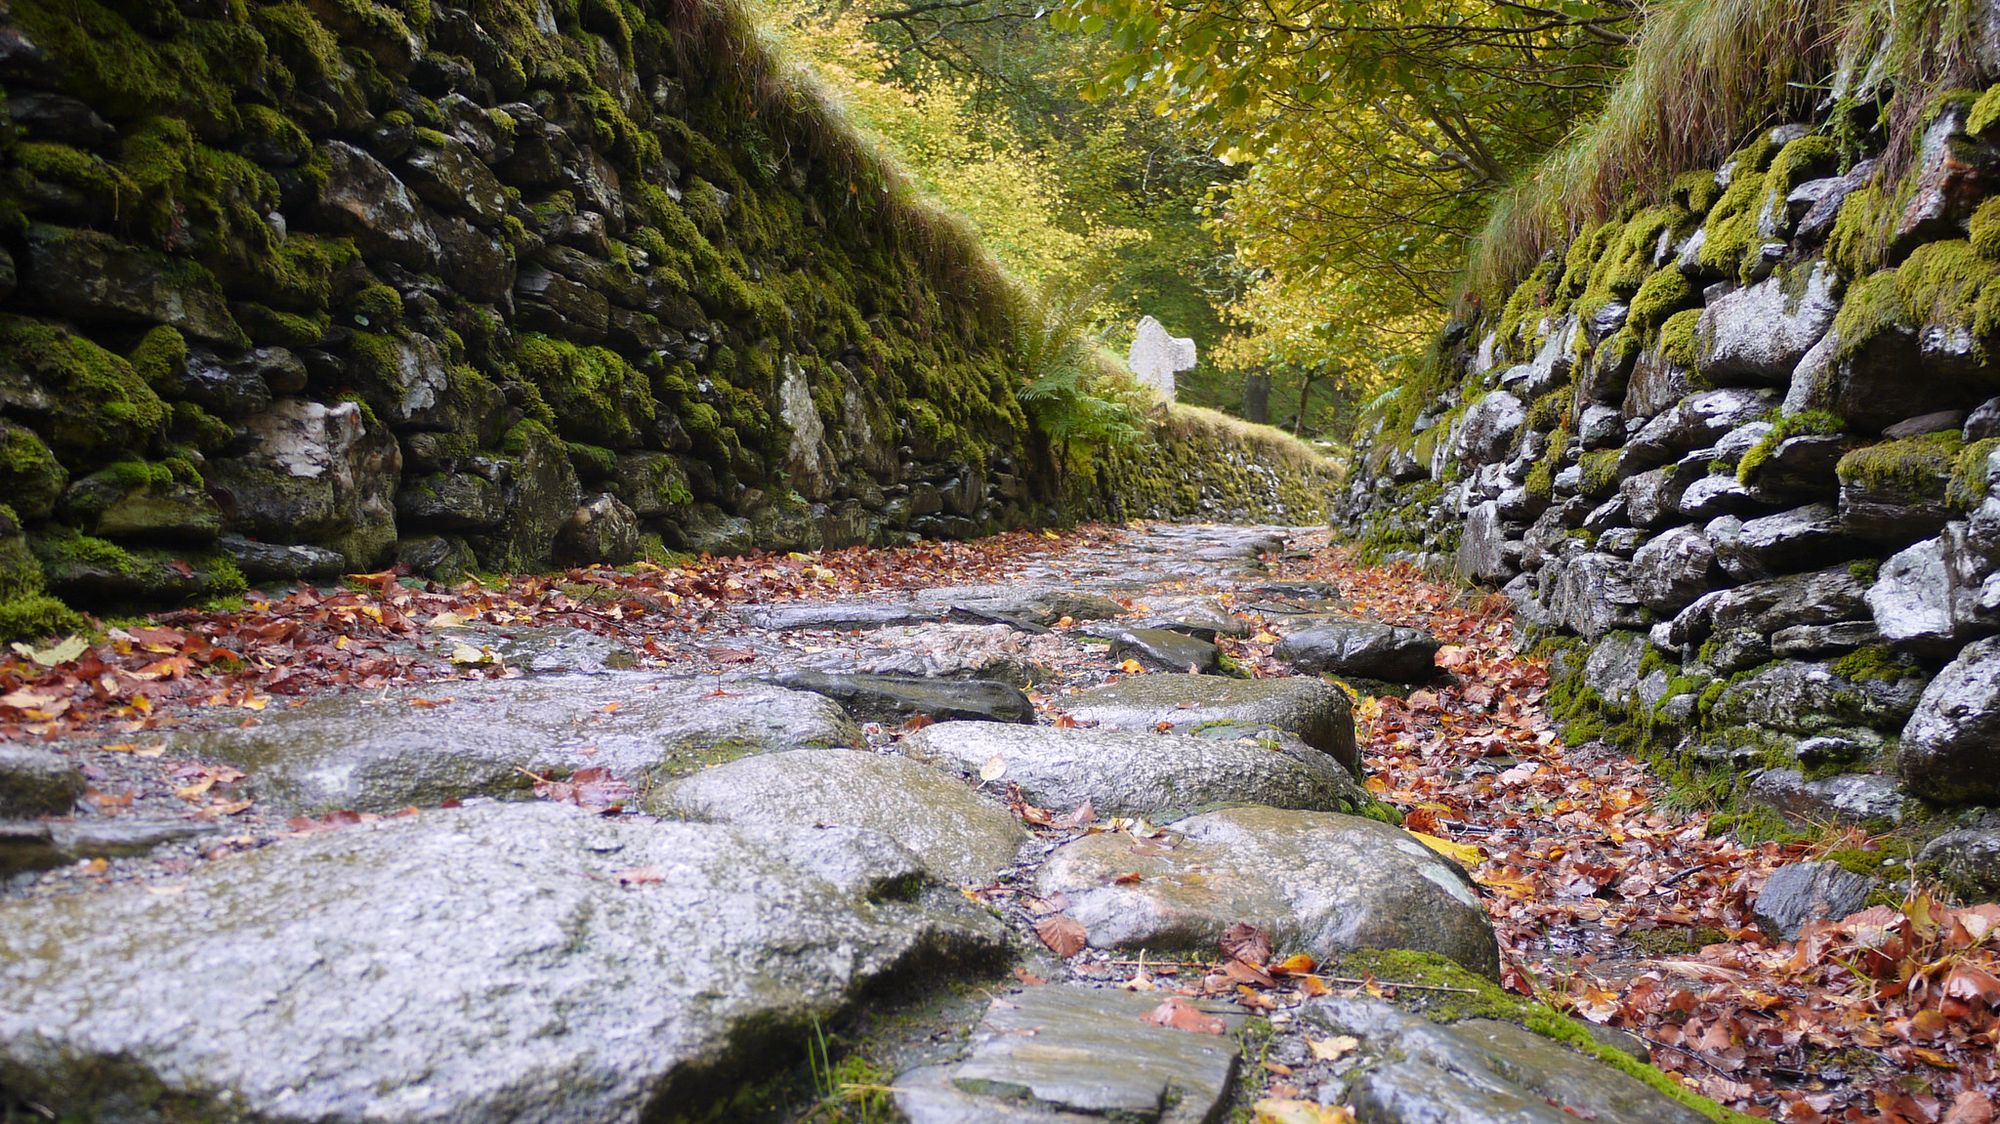 The source image, which is a stone pathway surrounded by rock walls and foliage, purportedly located in Ireland.